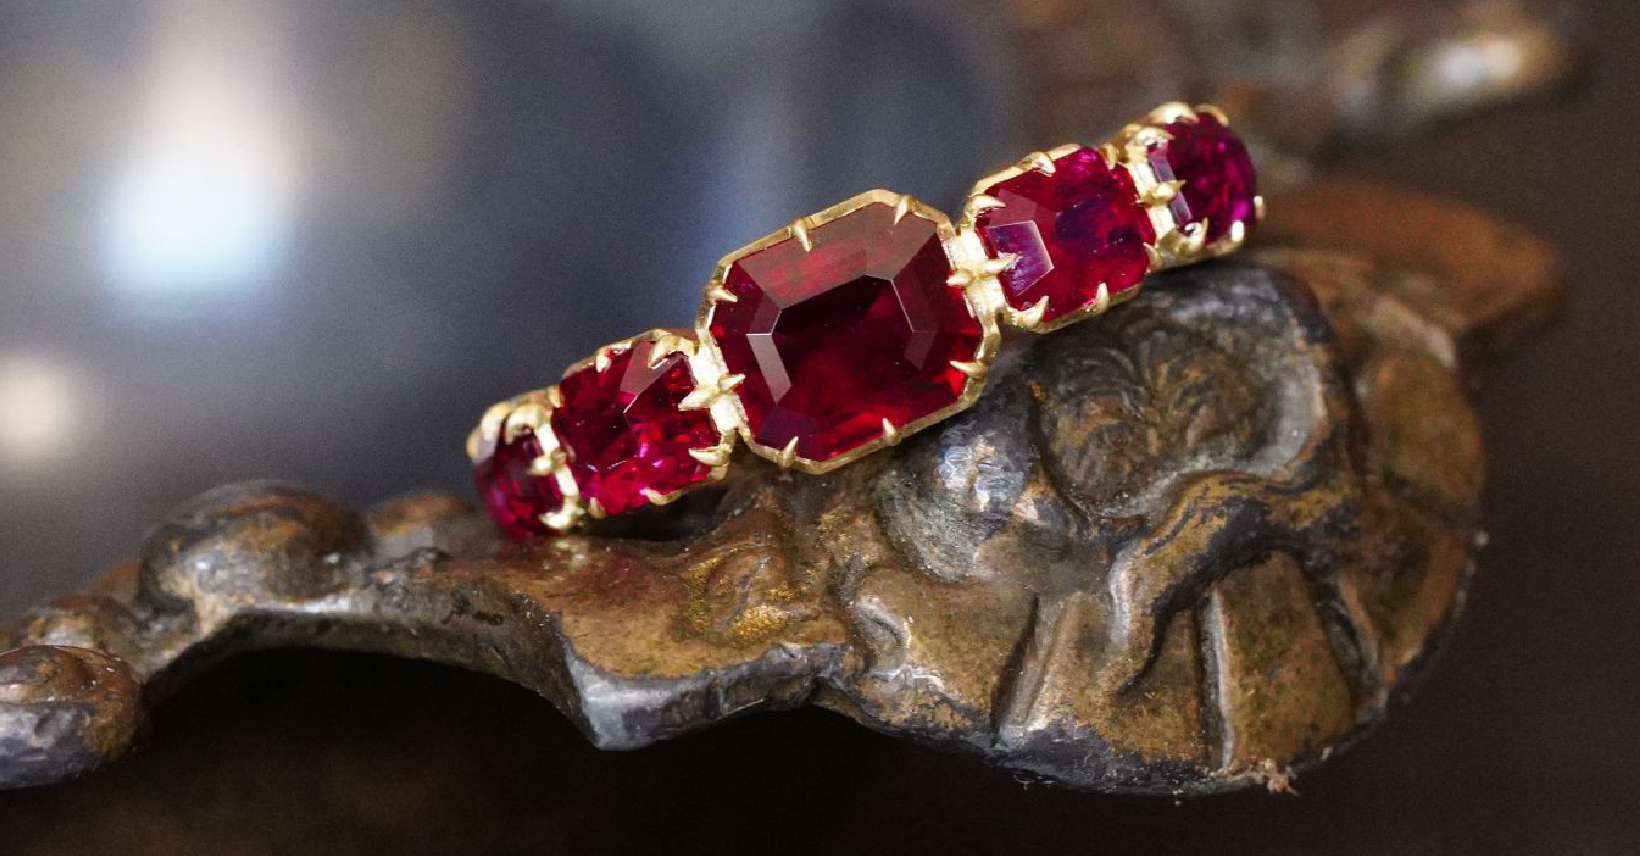 Antique Treasures: Unearthing Vintage Jewelry in Online Marketplaces